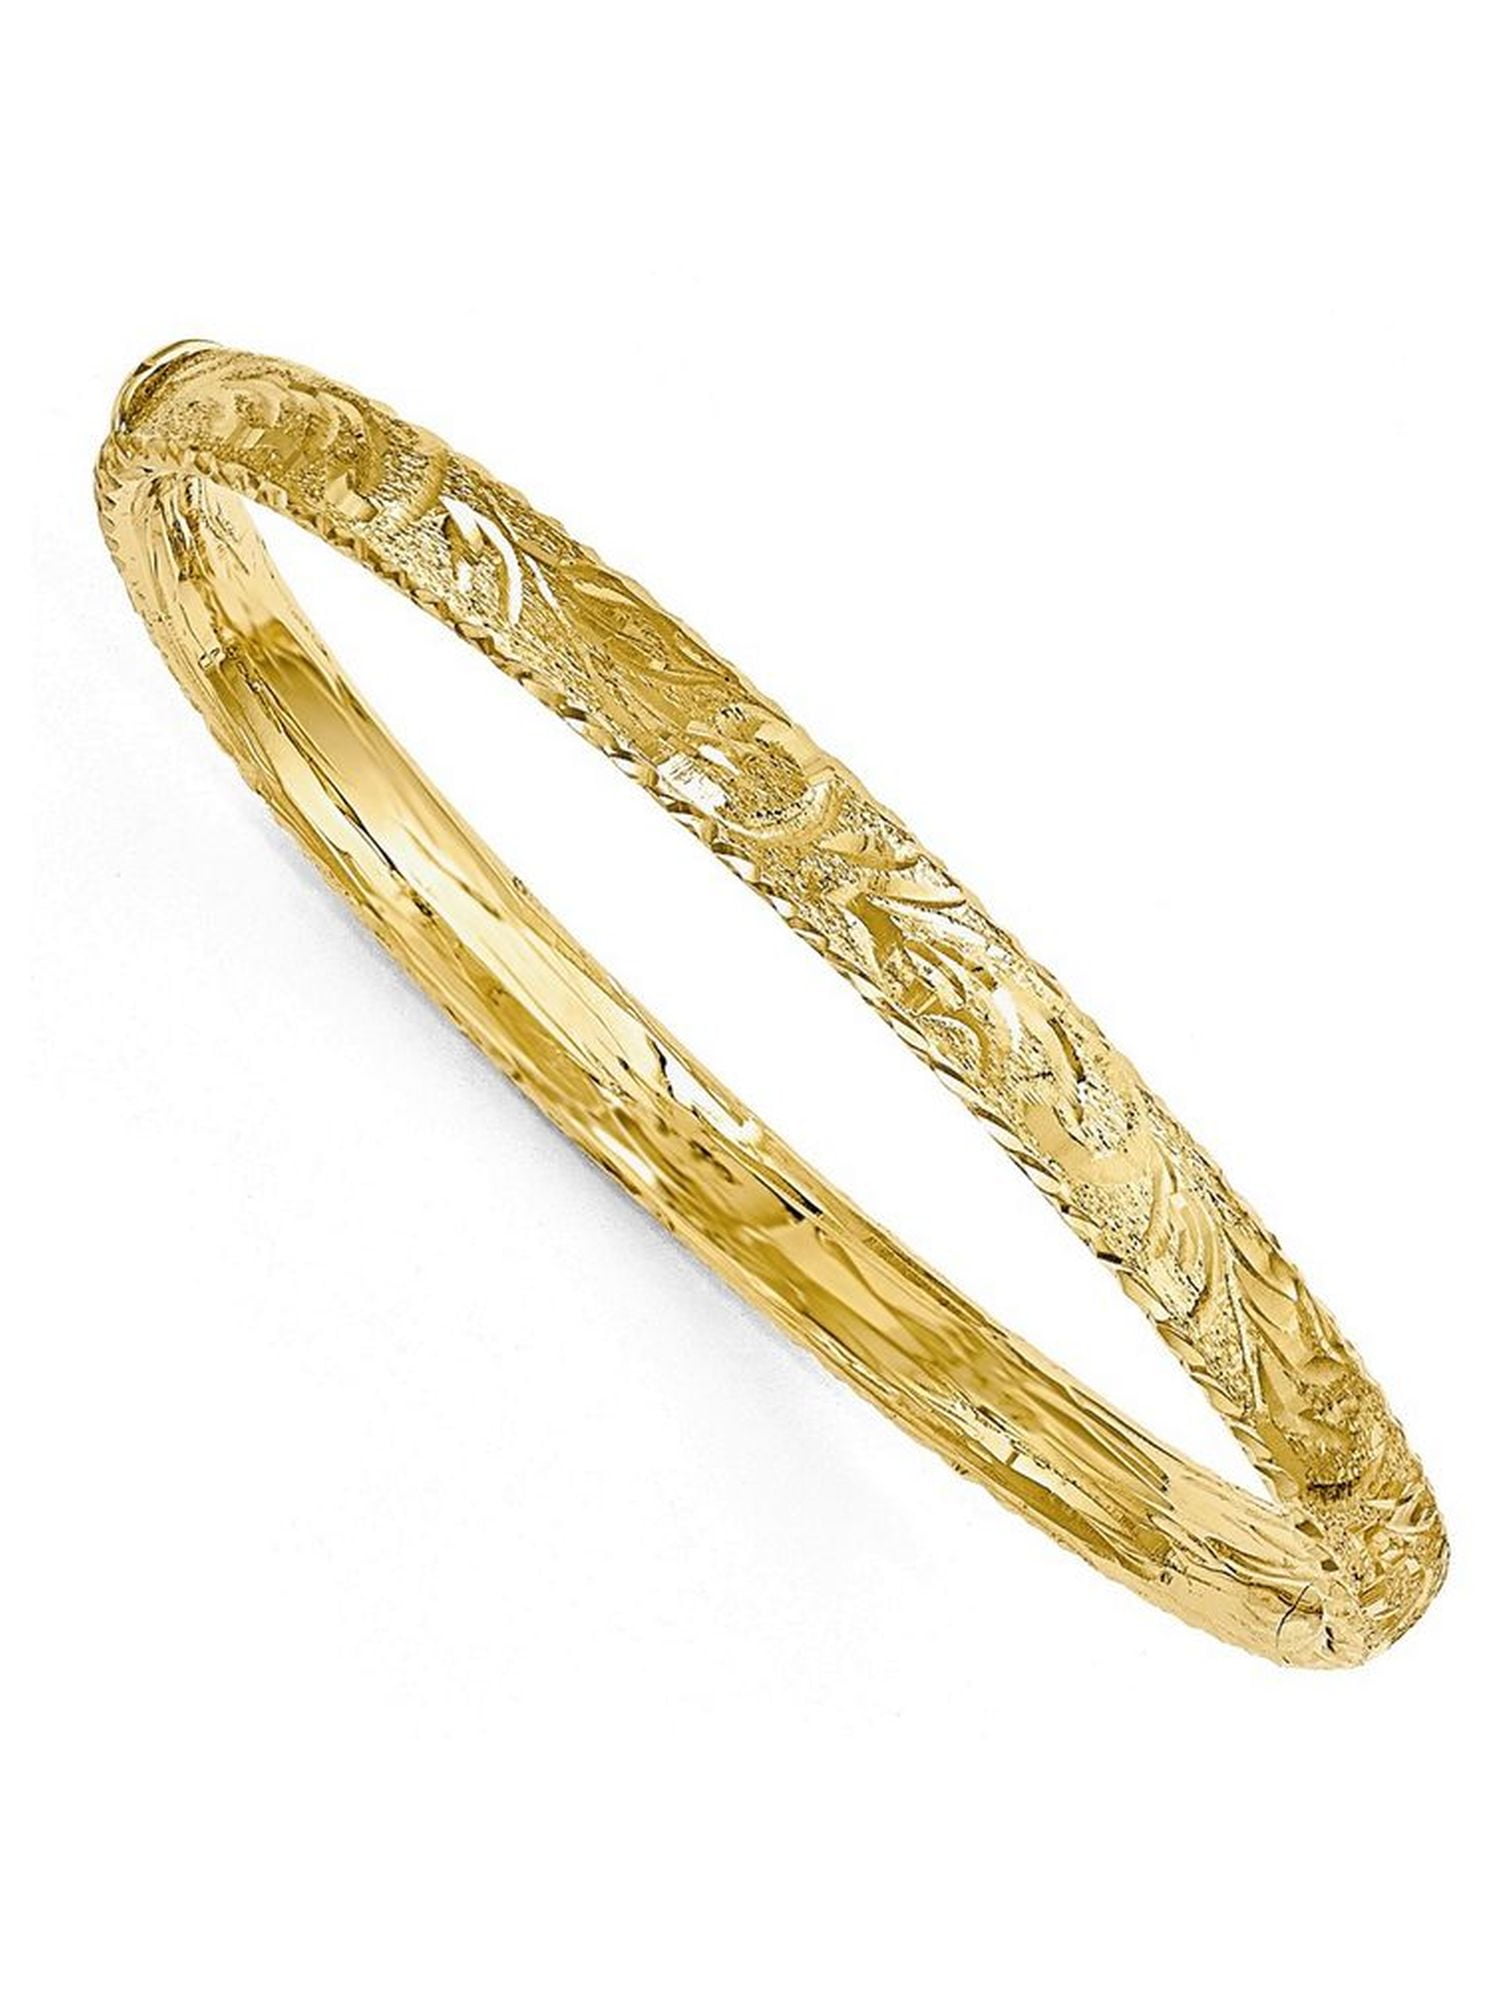 FJC Finejewelers - Finejewelers 14k Yellow Gold Bright Cut Bangle ...